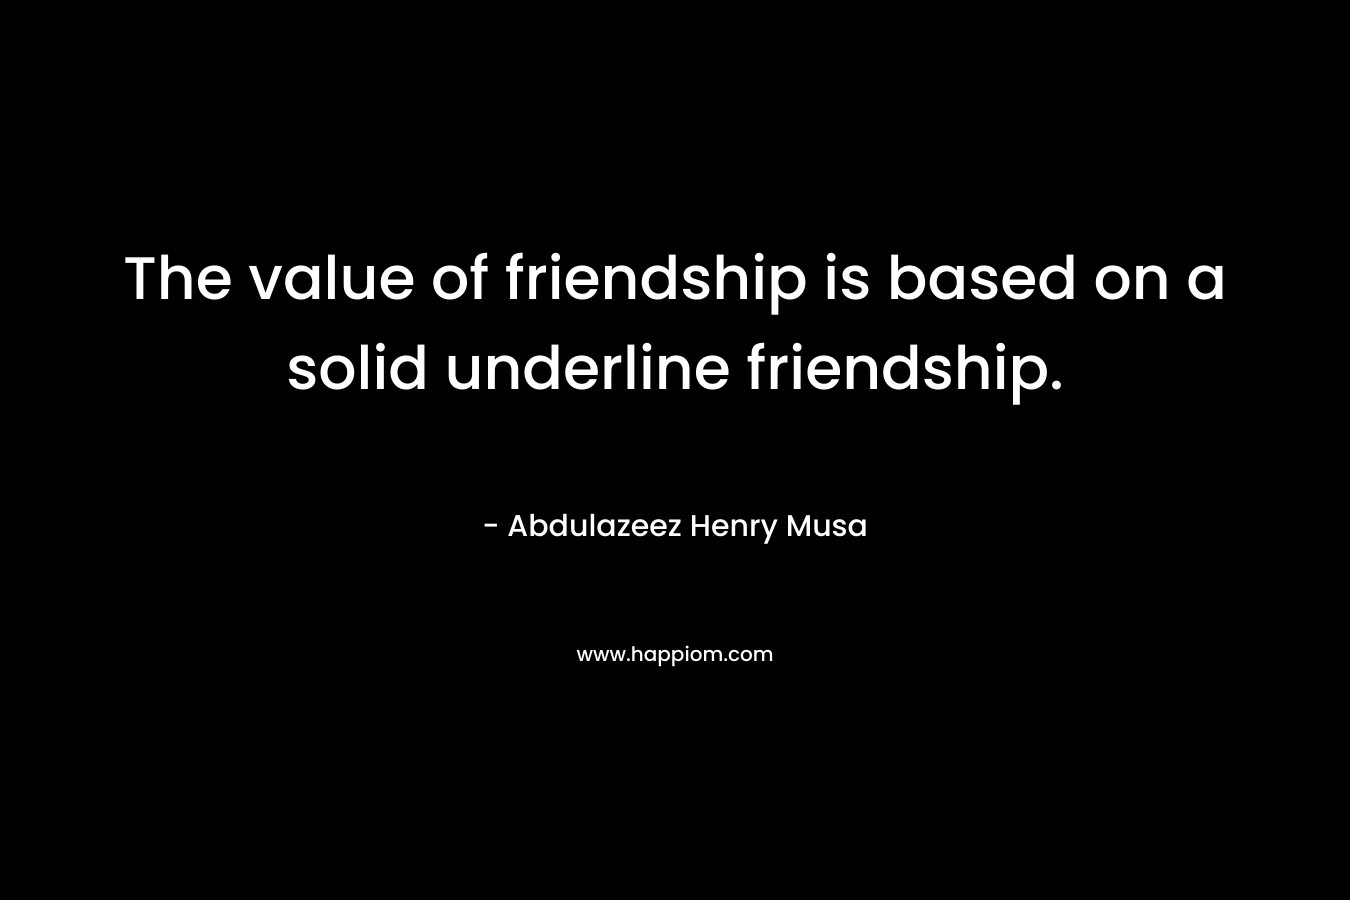 The value of friendship is based on a solid underline friendship. – Abdulazeez Henry Musa